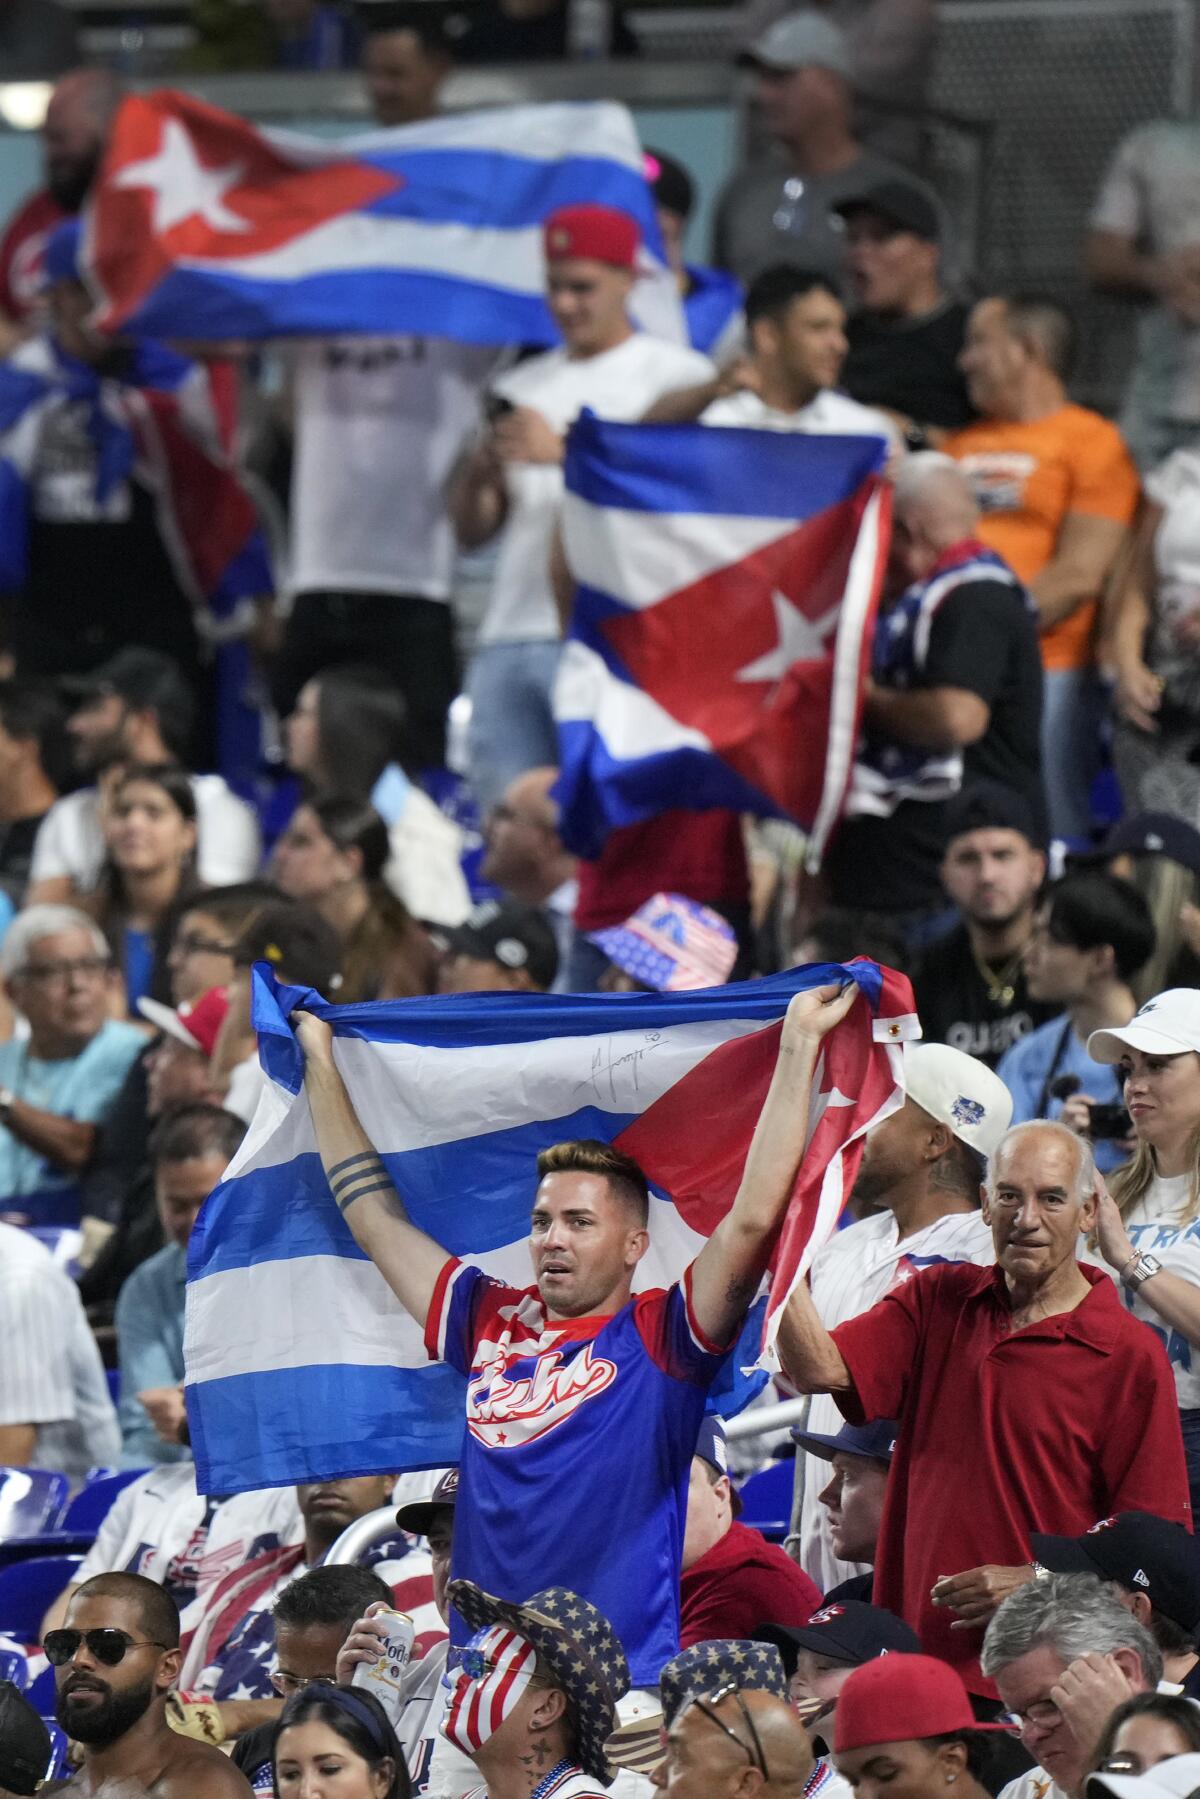 A crowd of soccer fans holding up the flag of Cuba, which a single star in a red triangle against blue and white stripes